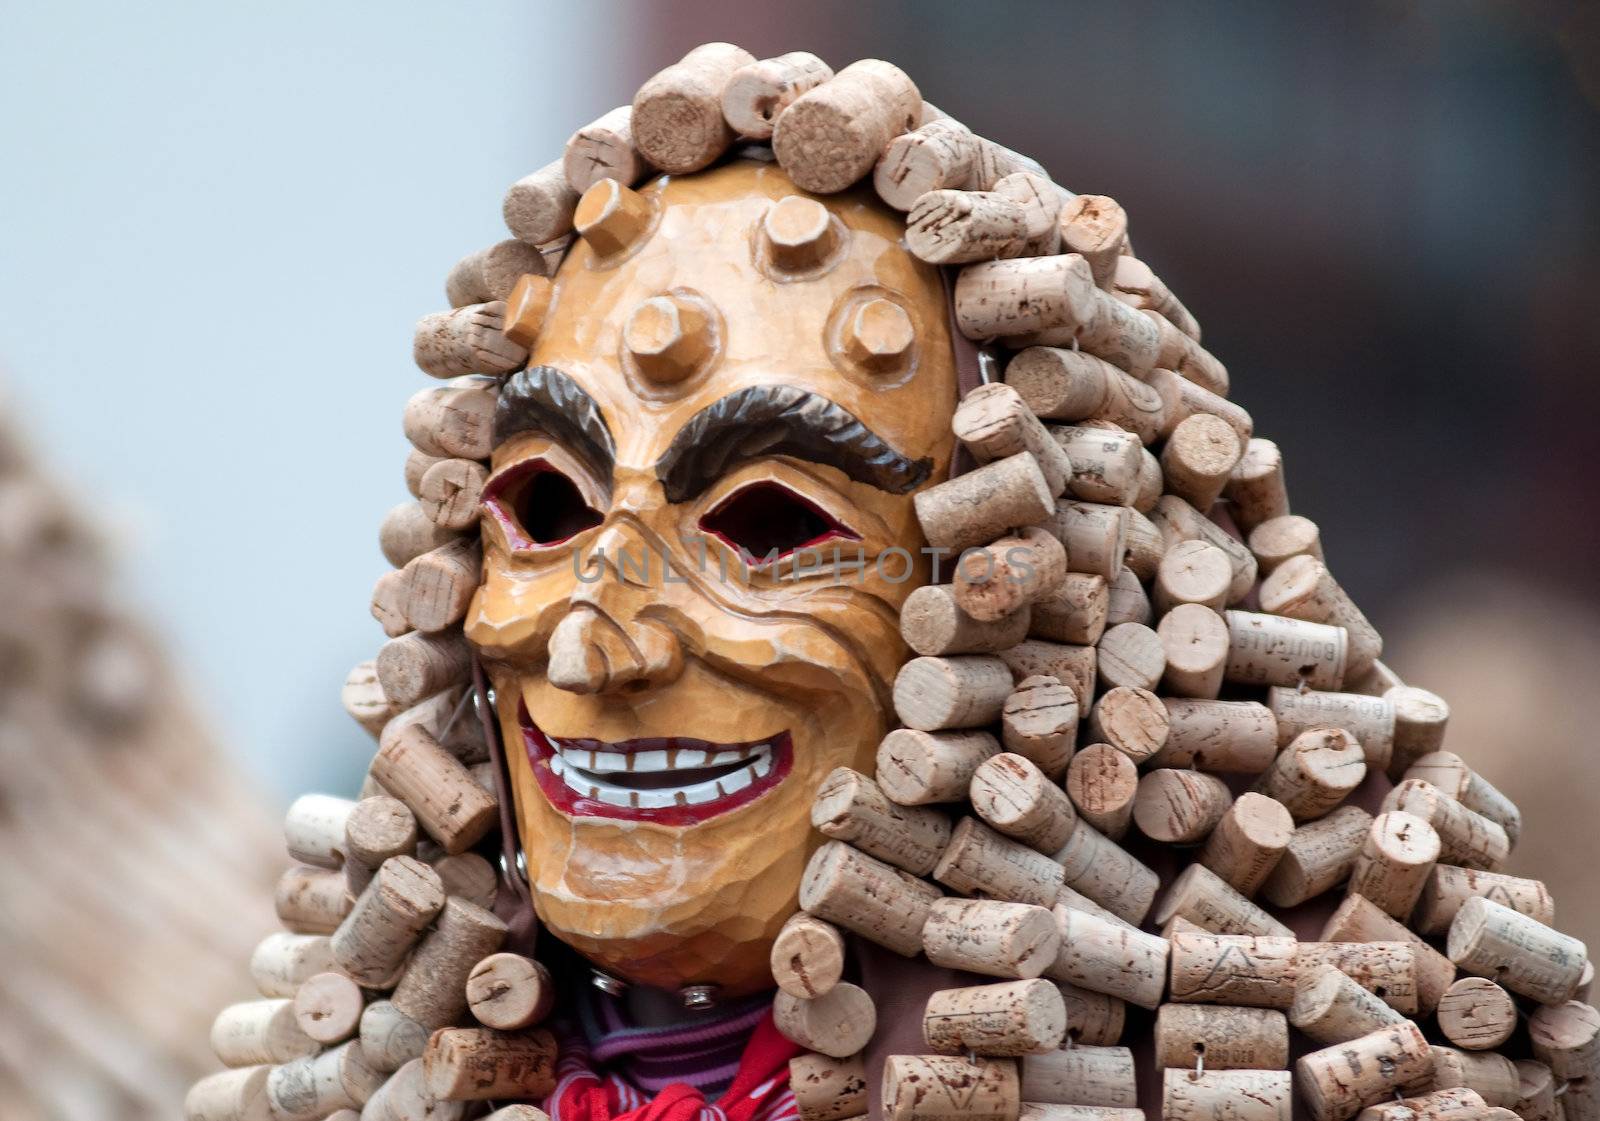 Mask parade at the historical carnival in Freiburg, Germany by Rainman